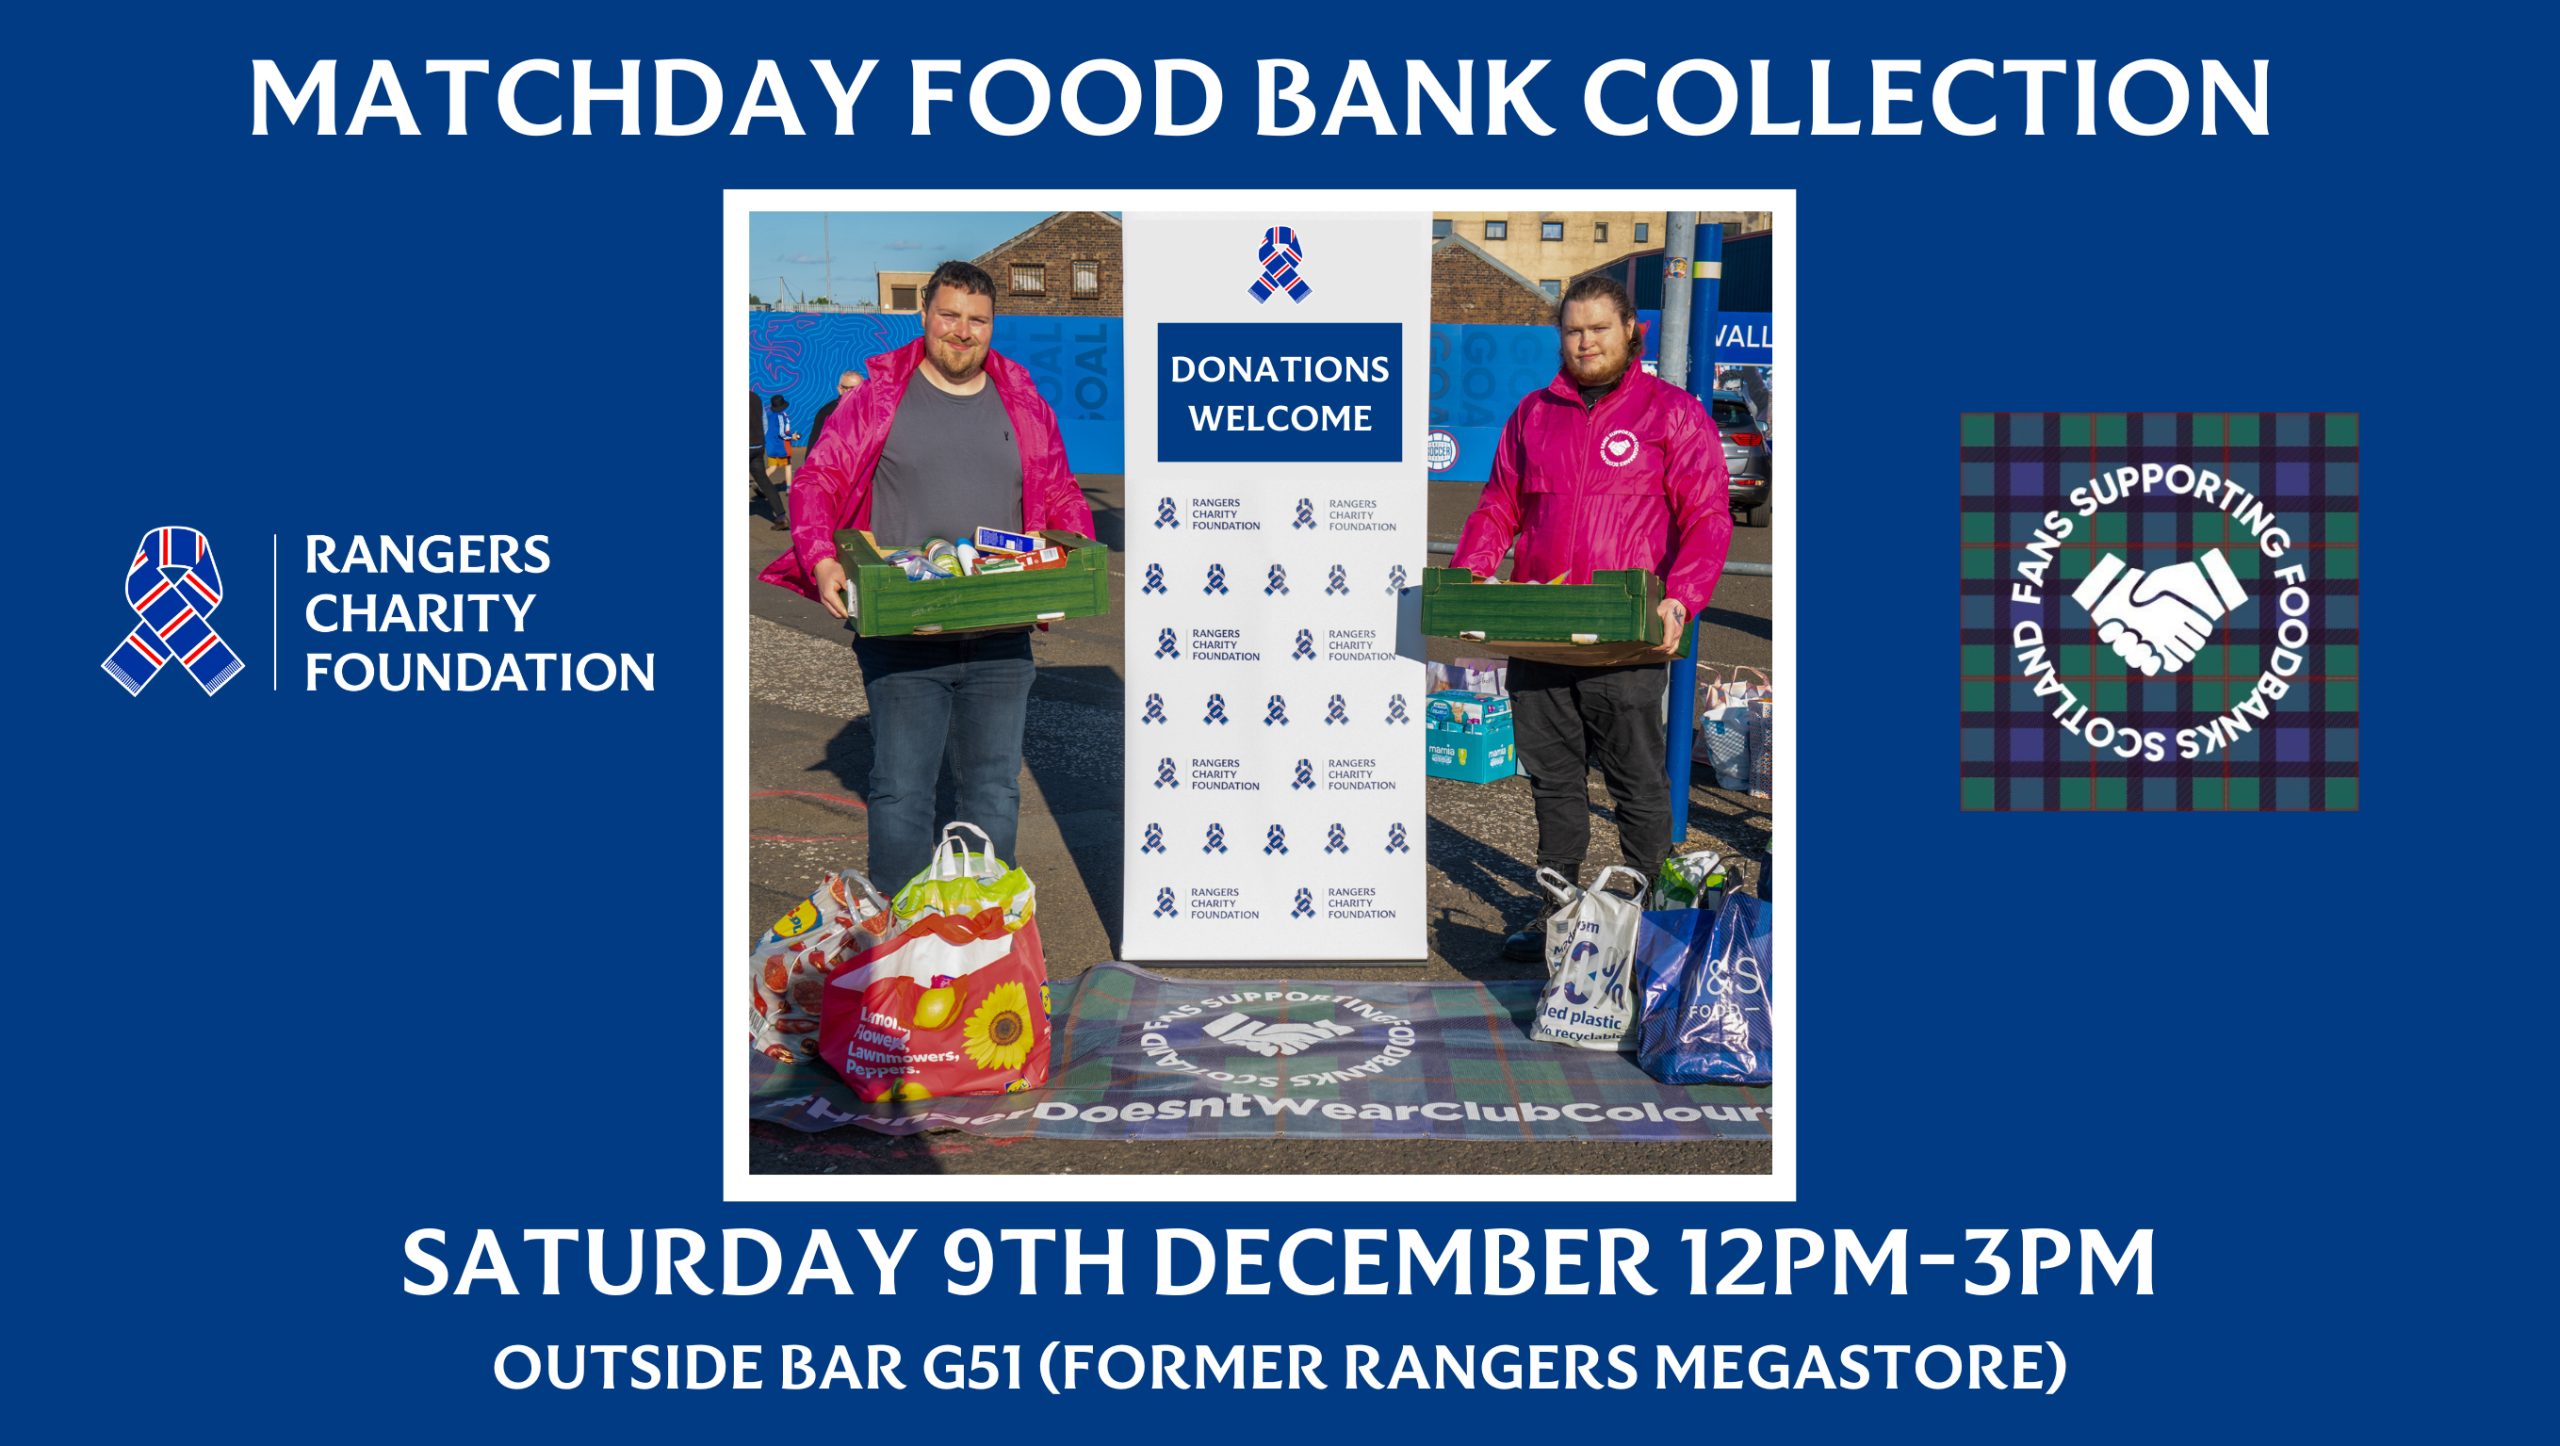 Match Day Food Bank Collection at Ibrox